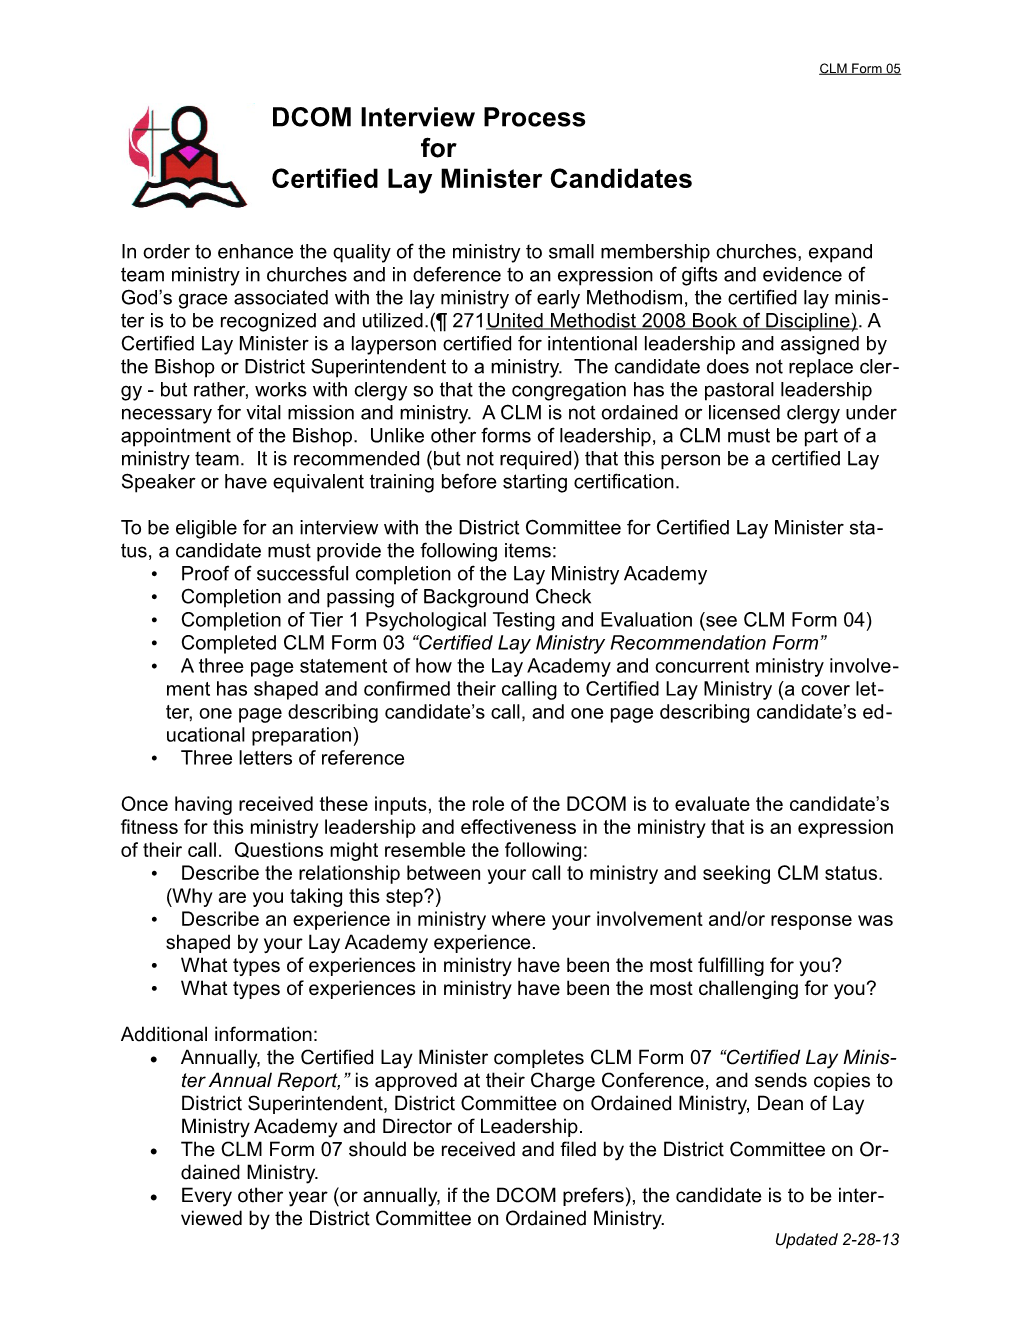 DCOM Interview Process for Certified Lay Minister Candidates